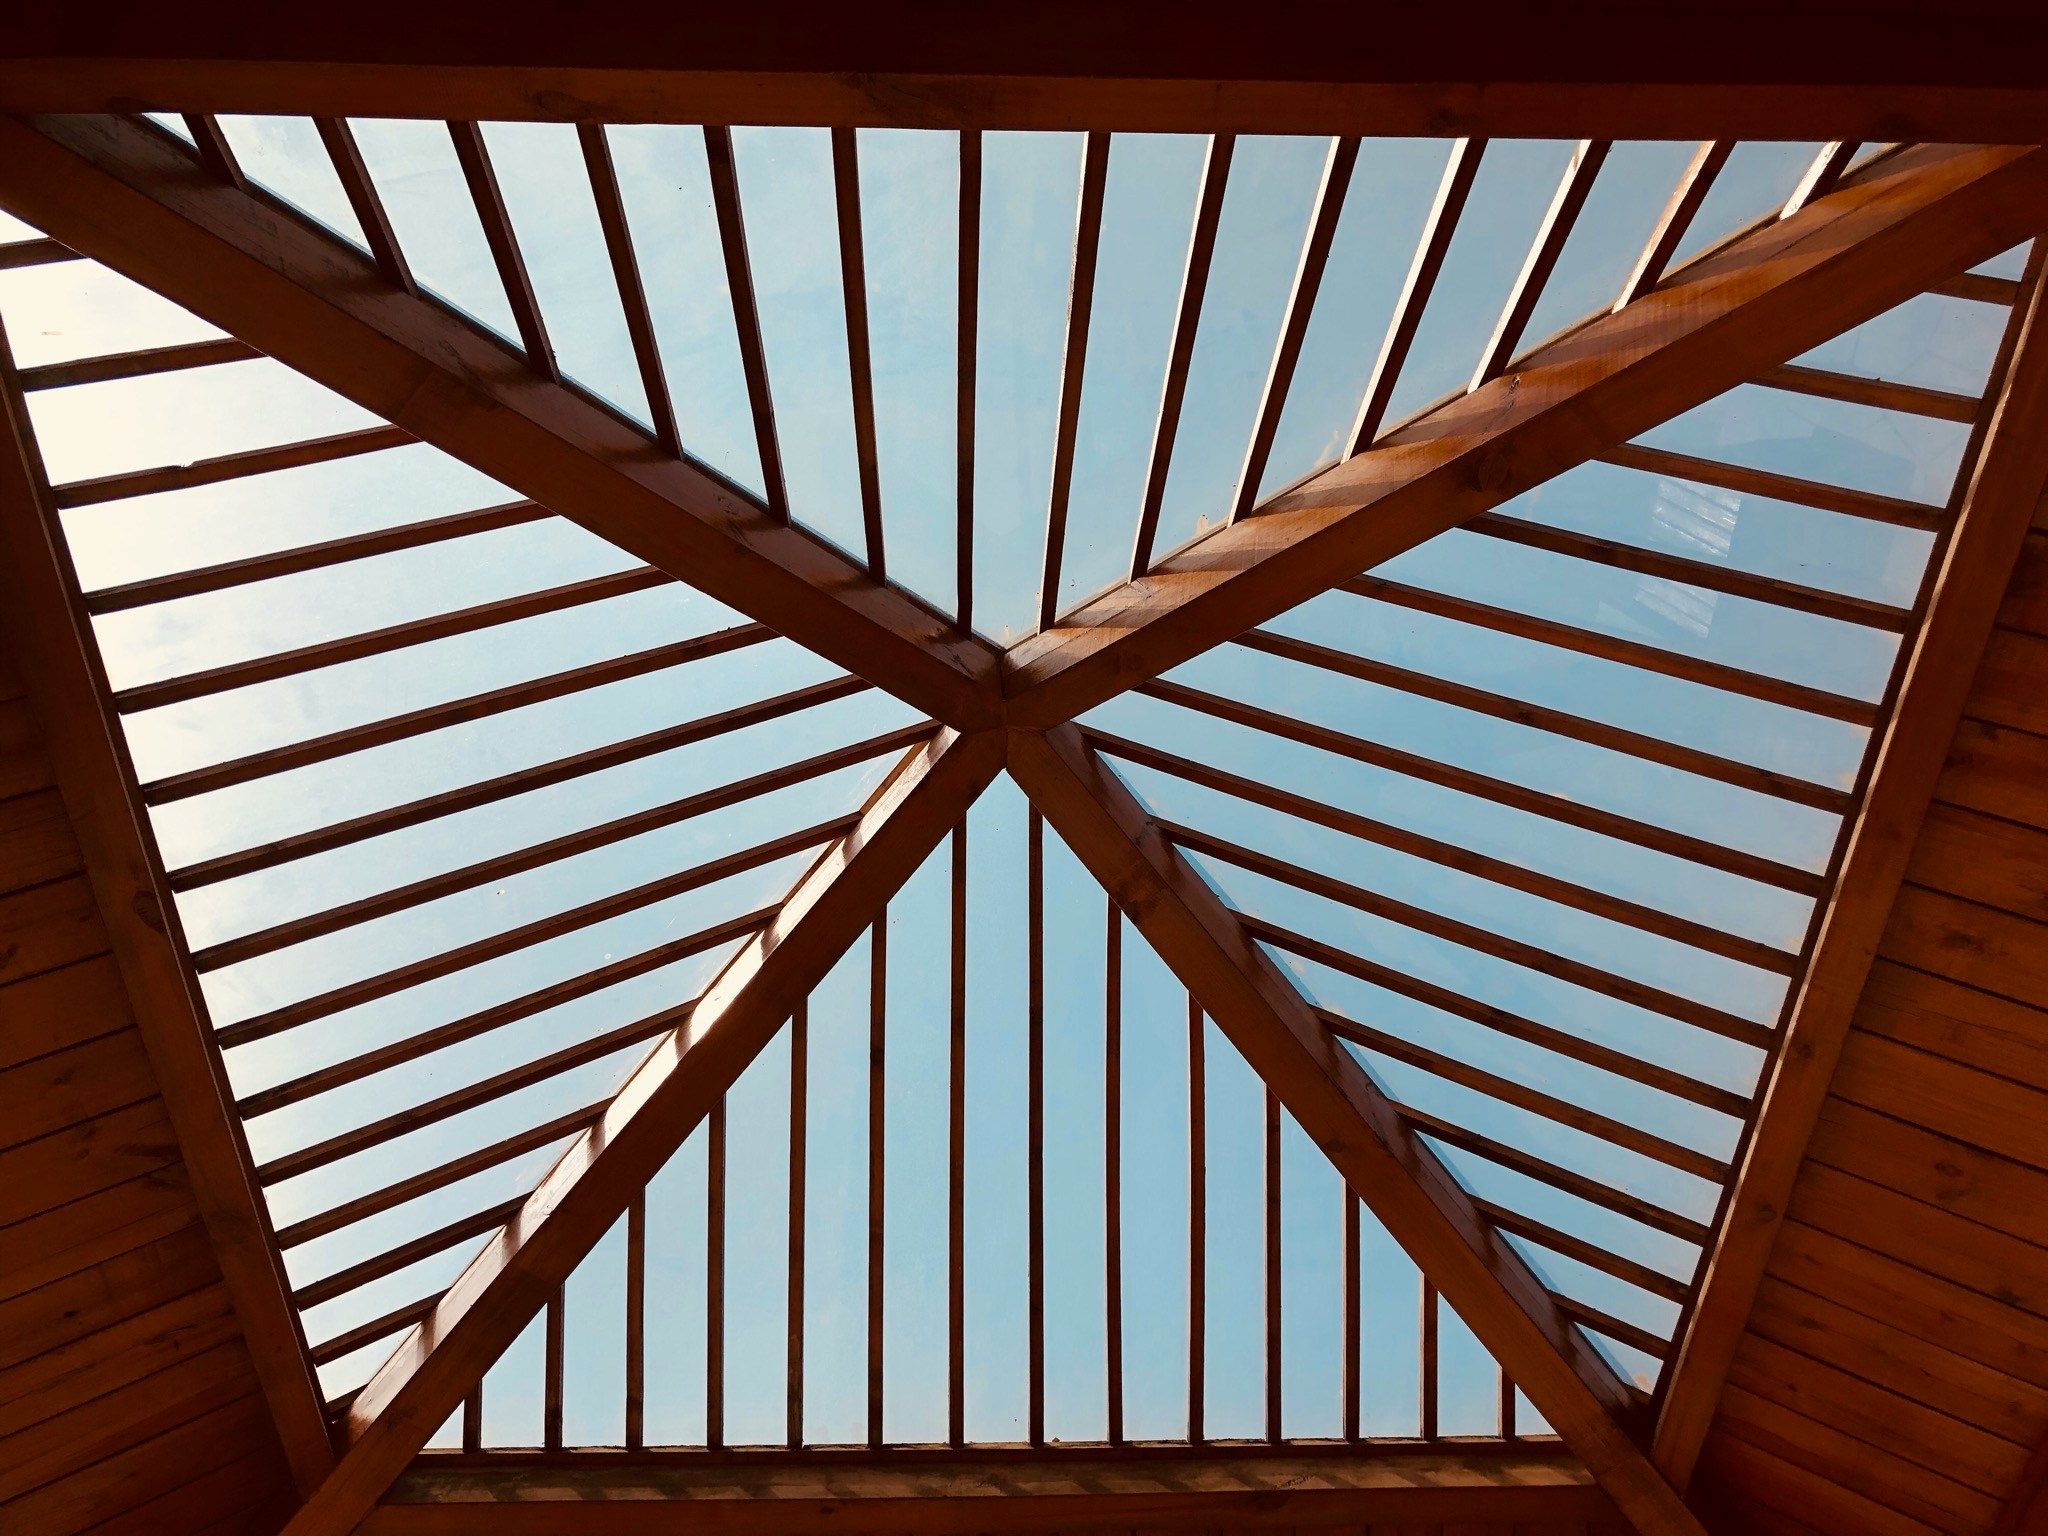 a view up into a building showing the roof and wood